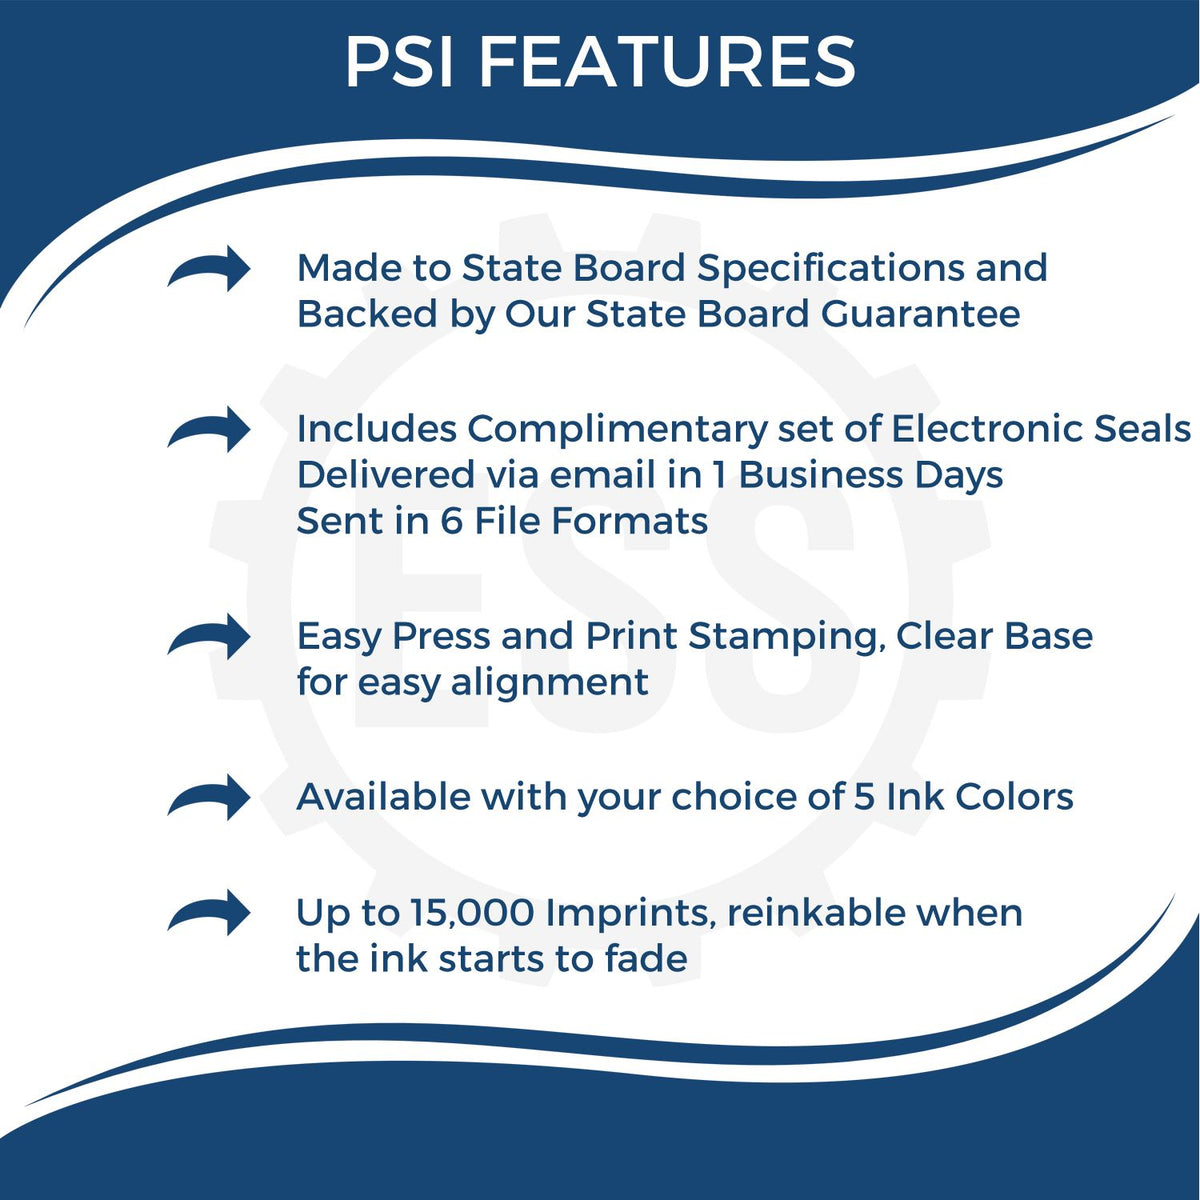 A picture of an infographic highlighting the selling points for the PSI Minnesota Notary Stamp